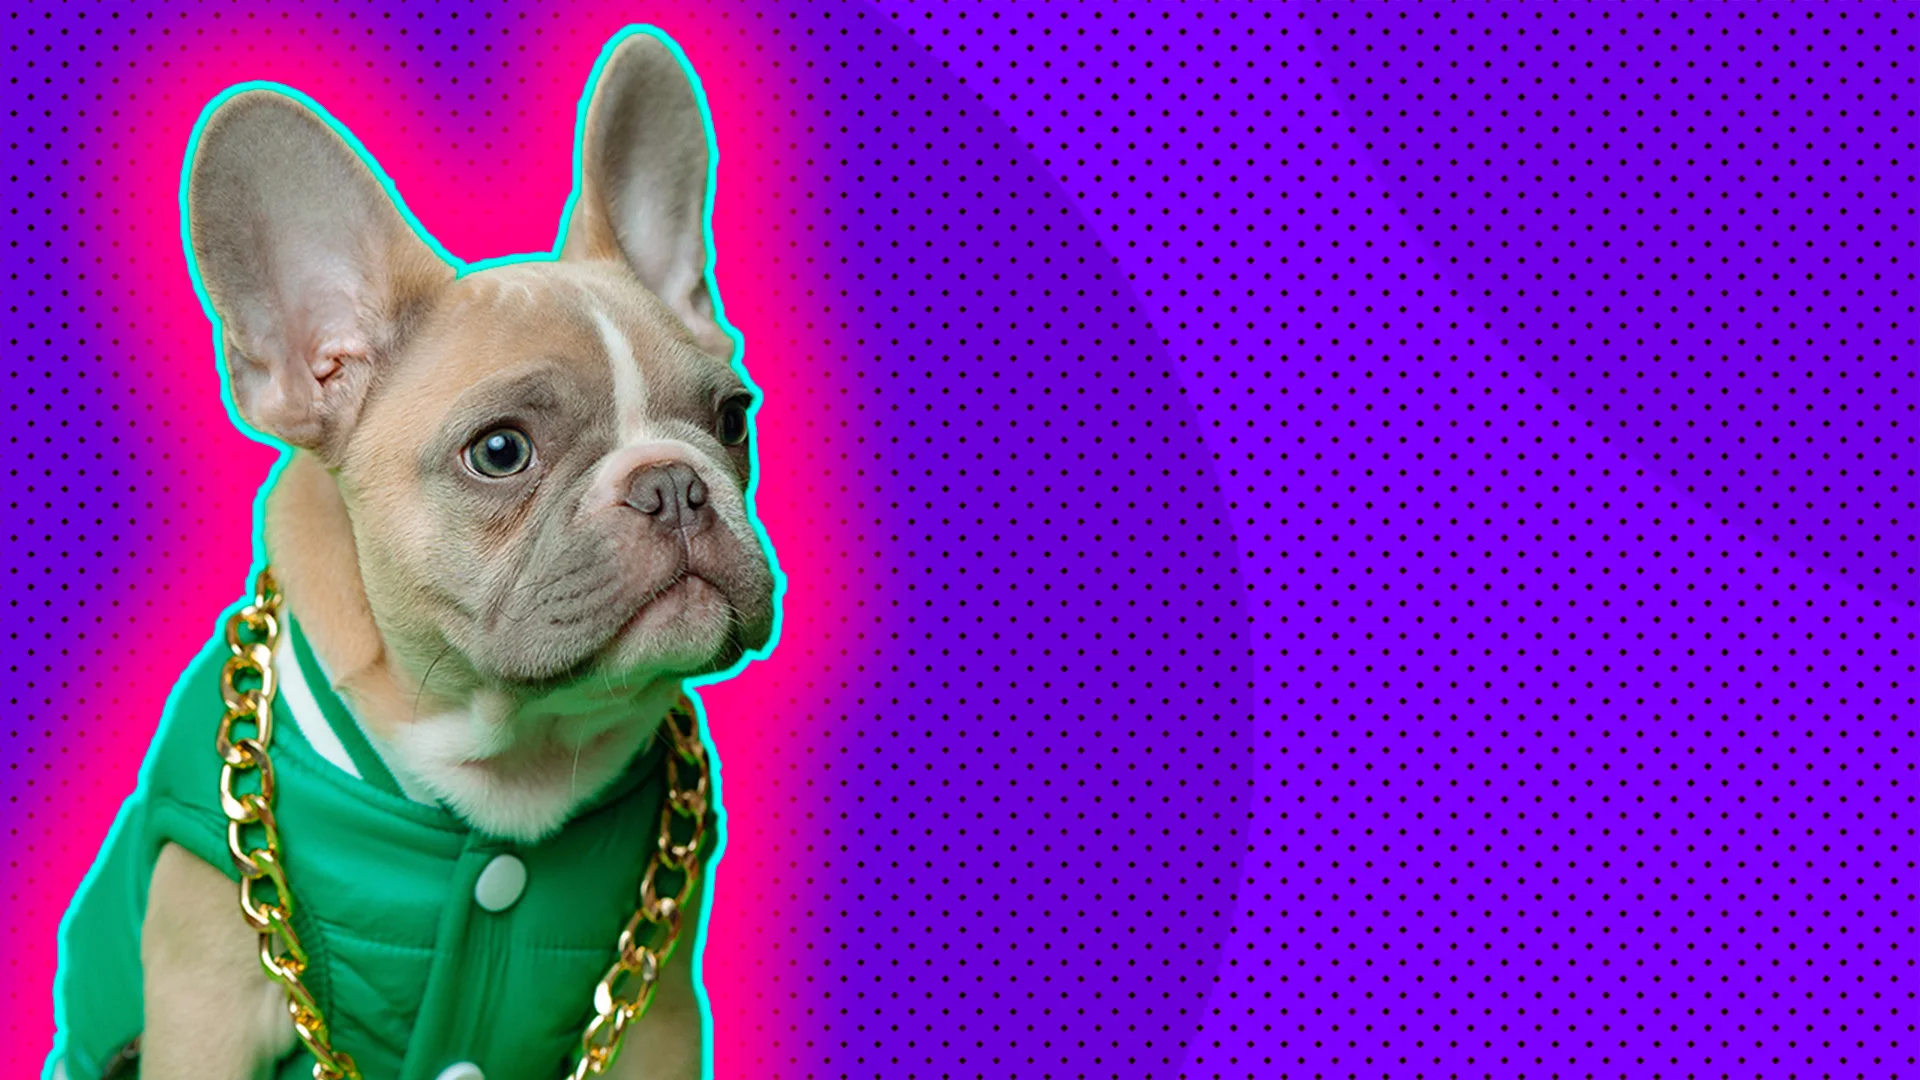 Pug dog in retro jacket and gold chain outlined by a pink glow effect on a dark purple dotted background